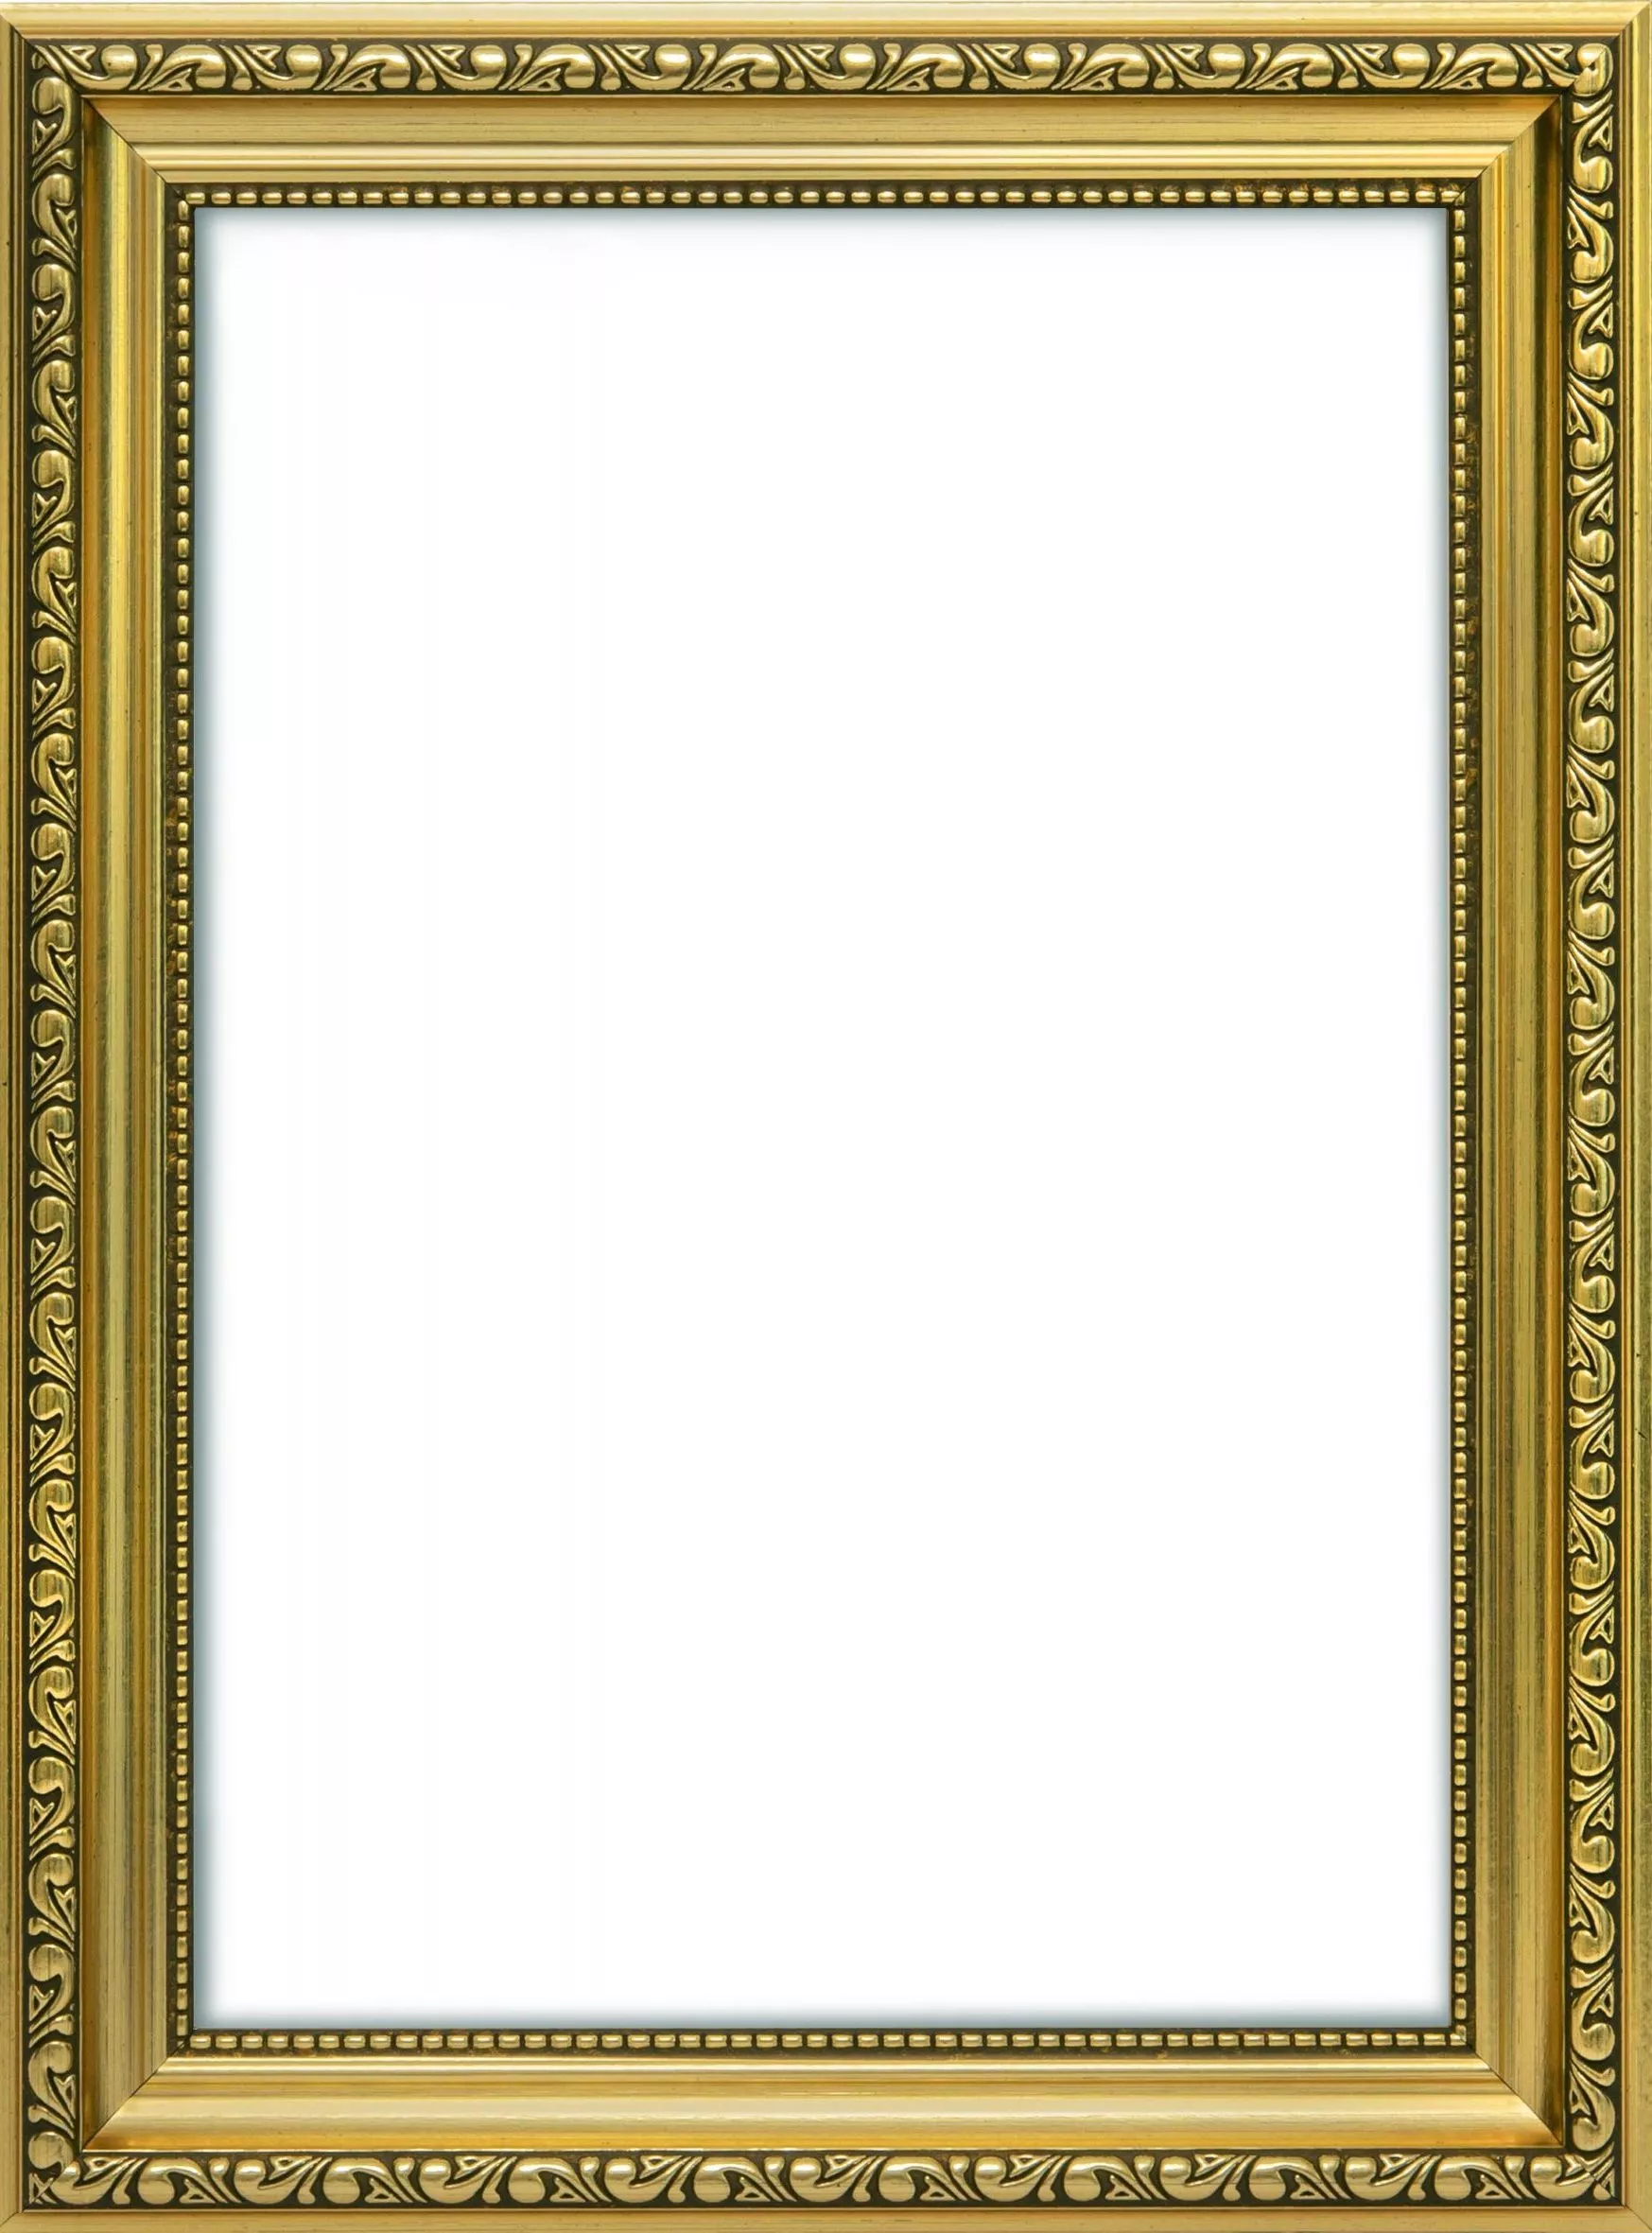 Gold 11.8 x 15.7 Moulding 33mm Wide and 27mm Deep - 30 x 40cm Memory Box Ornate Shabby Chic Picture/Photo/Poster frame with Real Glass 